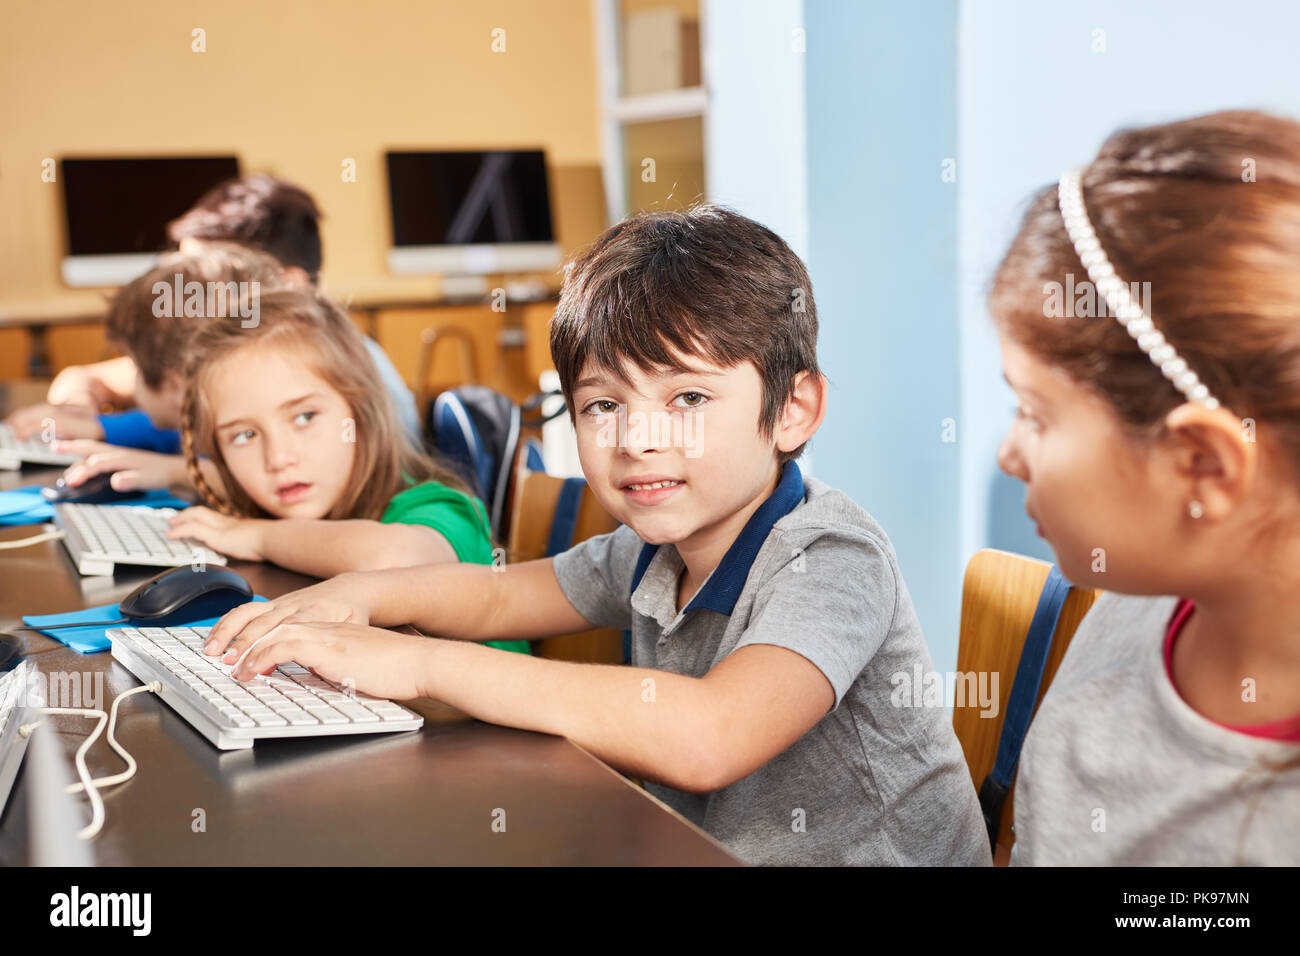 Boy as a student at the computer in computer science teaching elementary school Stock Photo